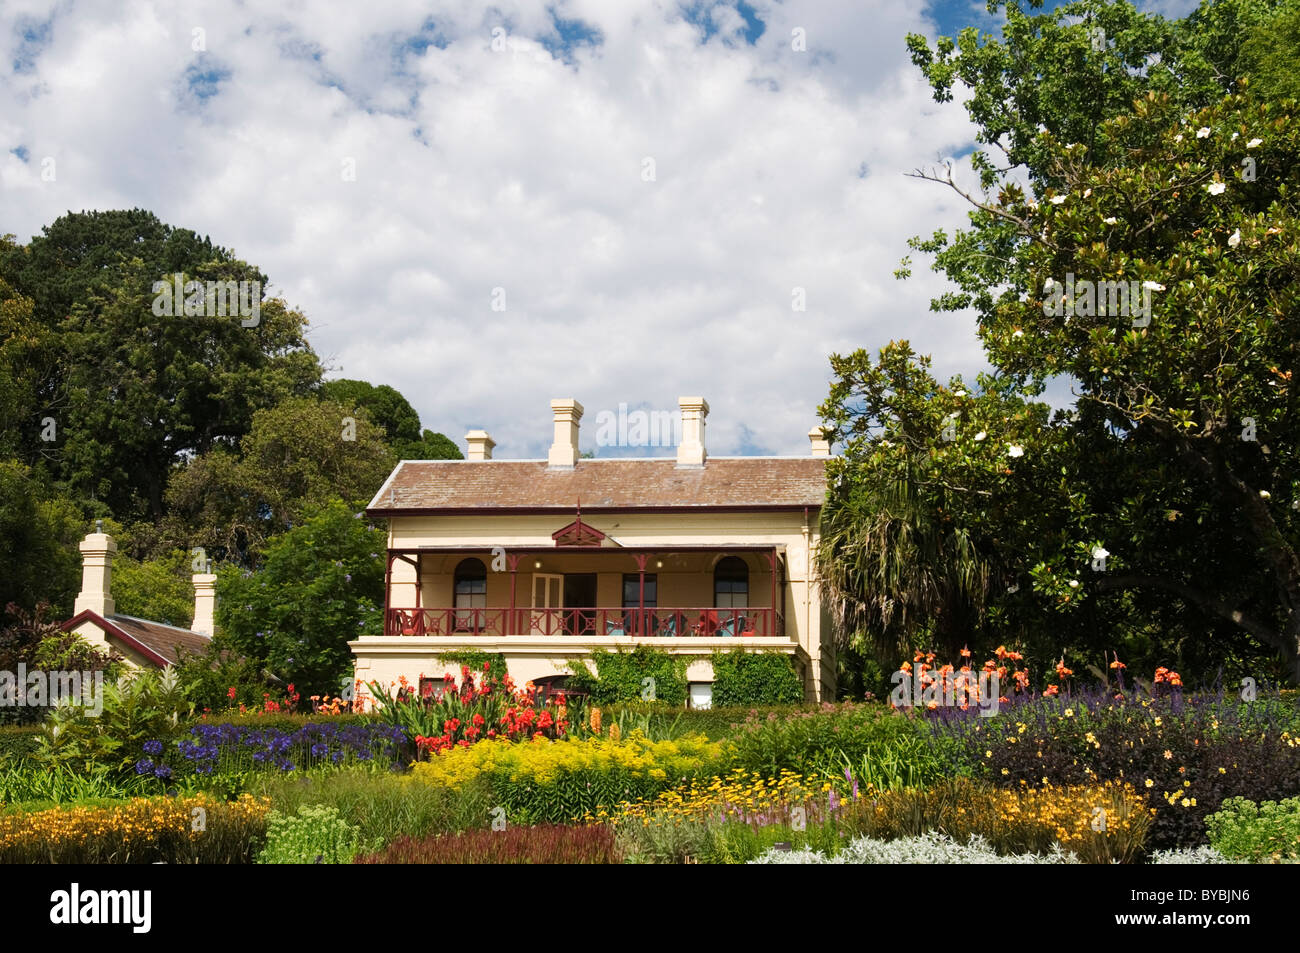 Gardens House, the official residence at the Royal Botanic Gardens, Melbourne Stock Photo